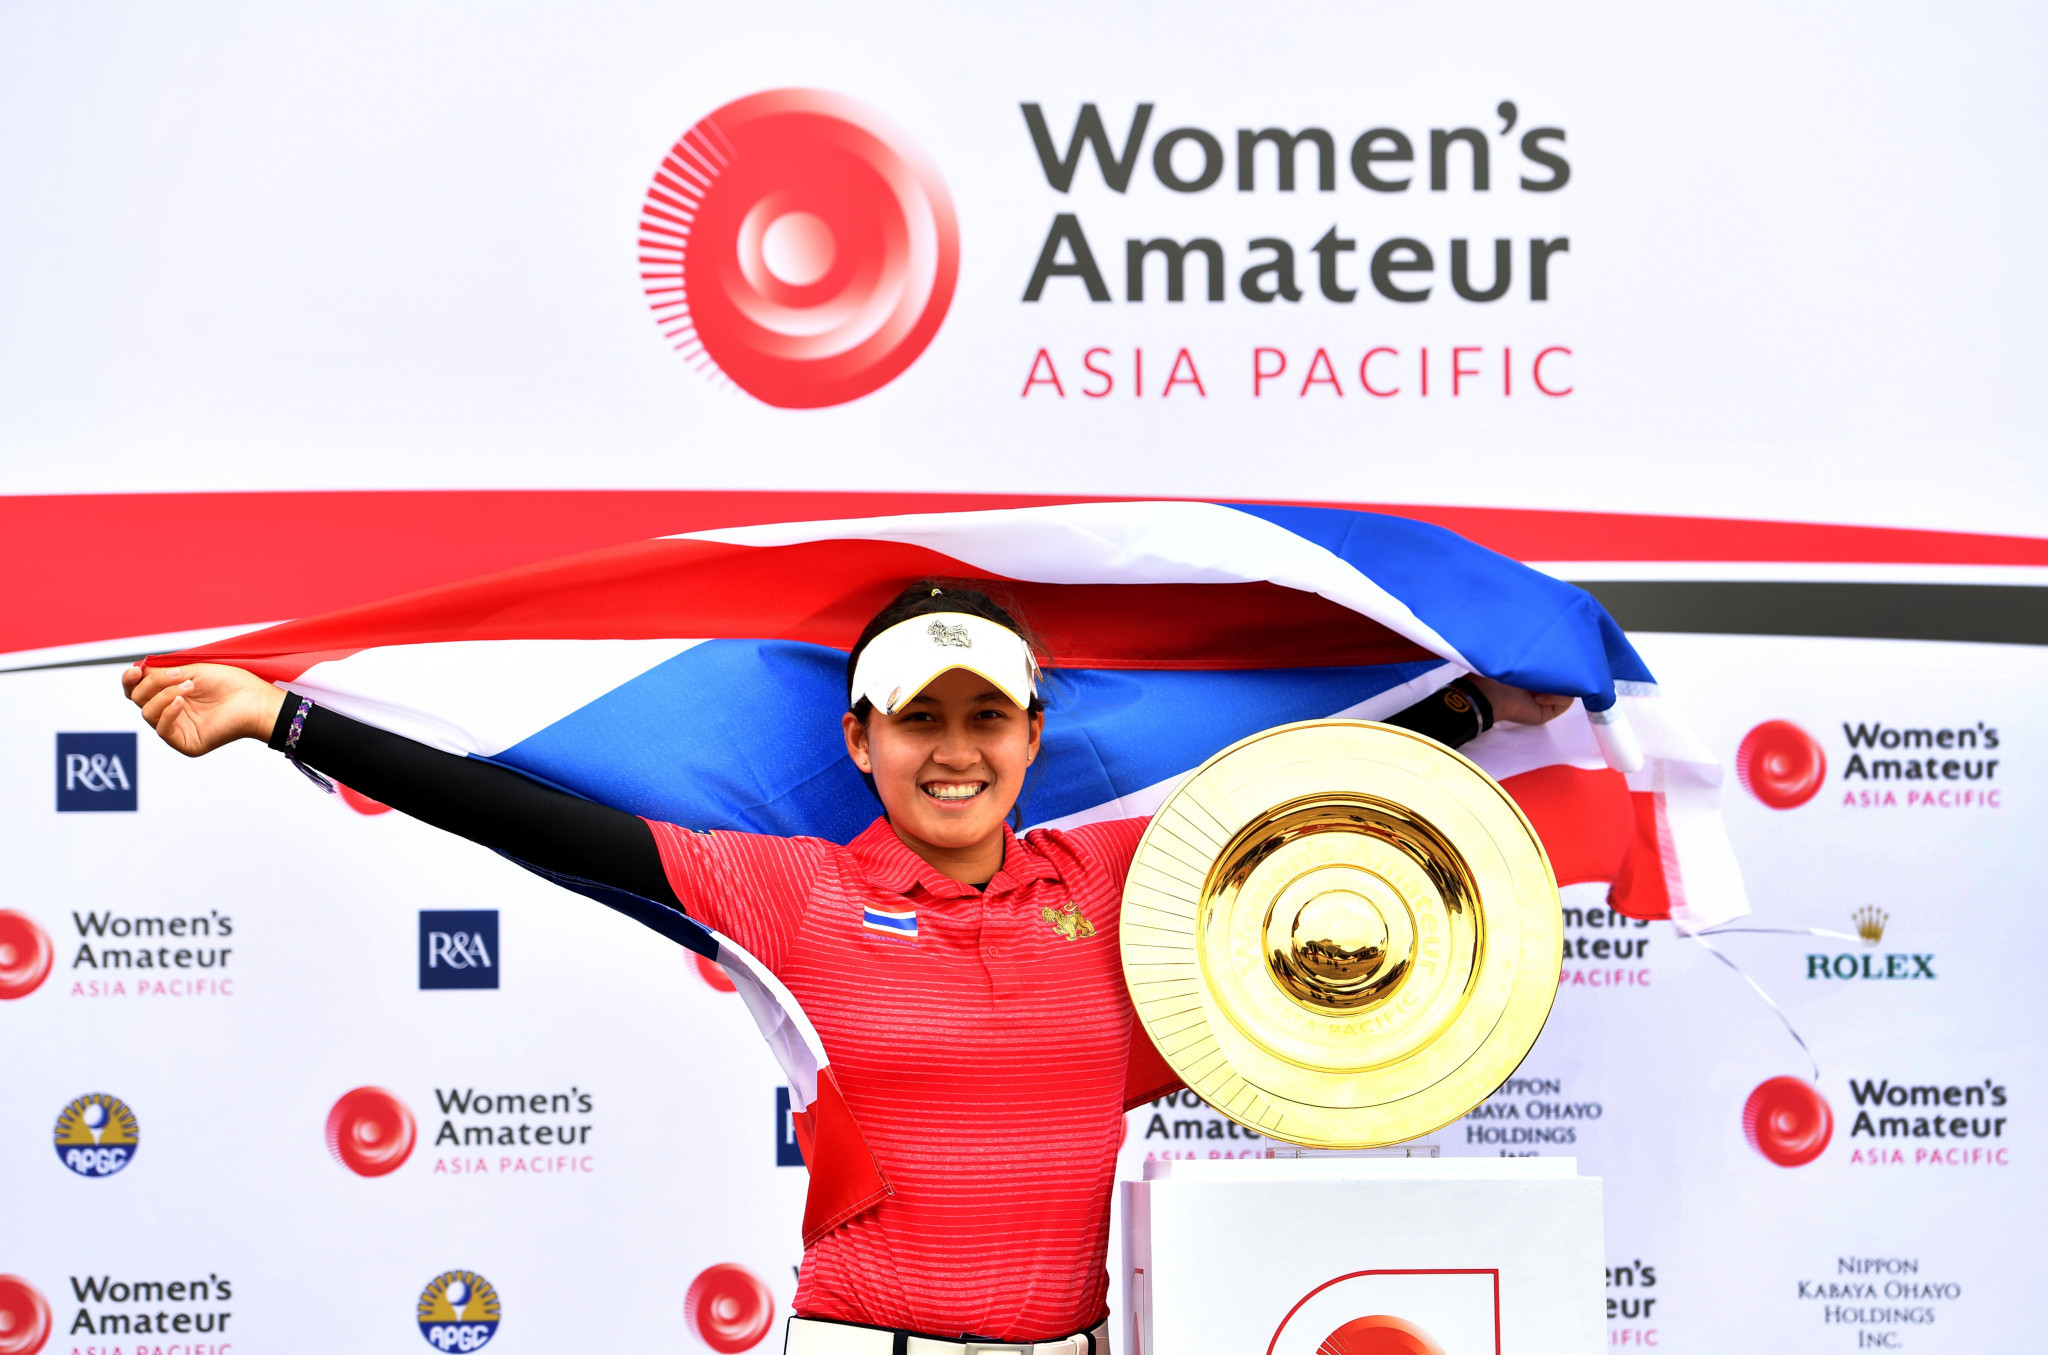 Thailand's Atthaya Thitikul won the inaugural edition of the Women’s Amateur Asia-Pacific golf championship in Singapore last year ©Women's Amateur Asia-Pacific